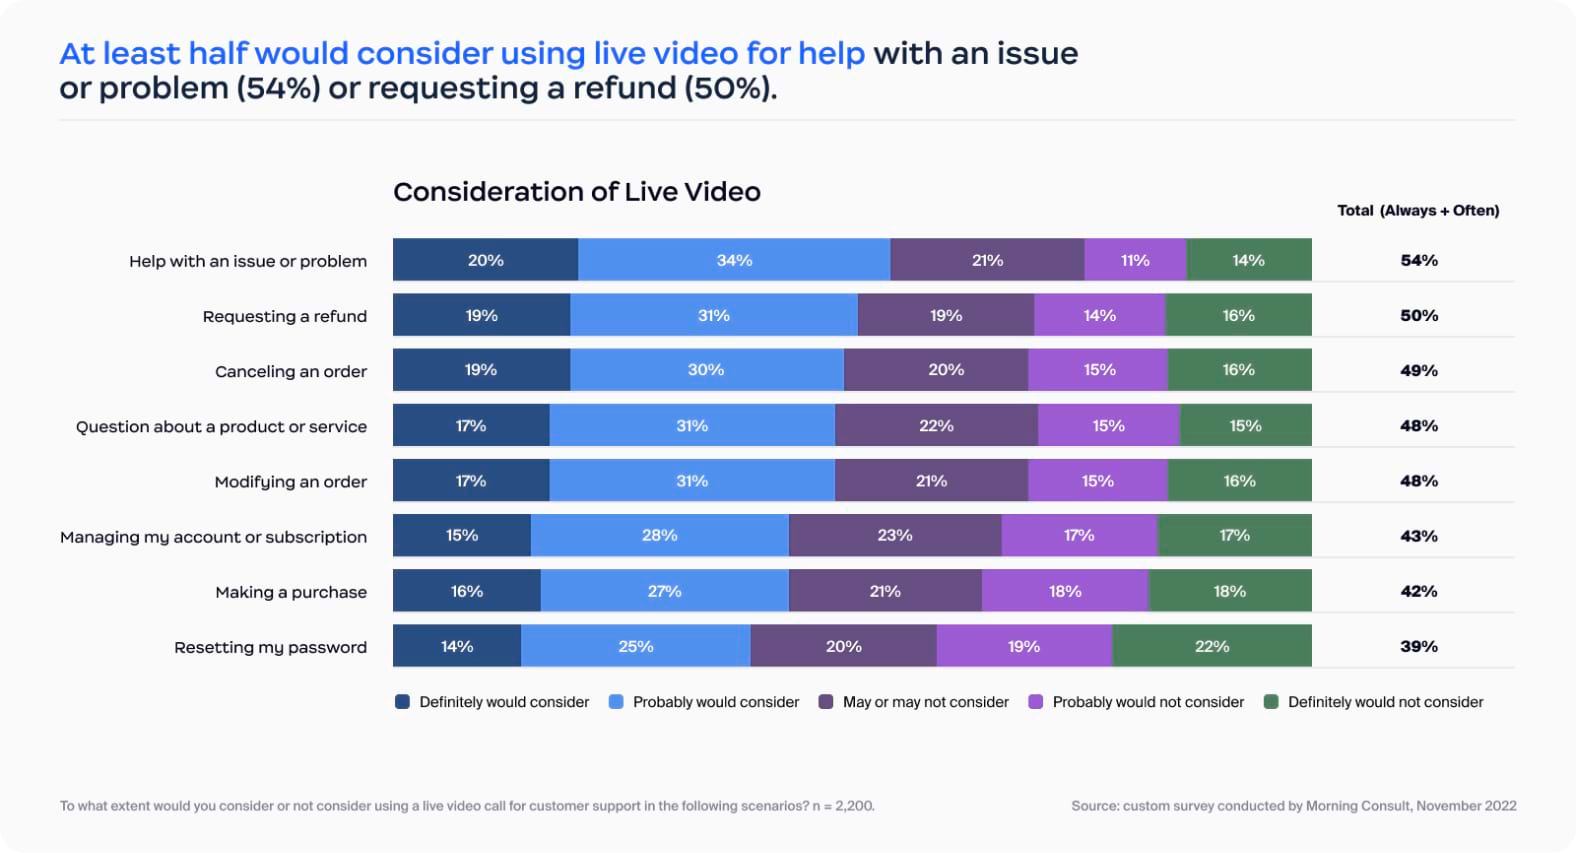 At least half would consider using live video for help